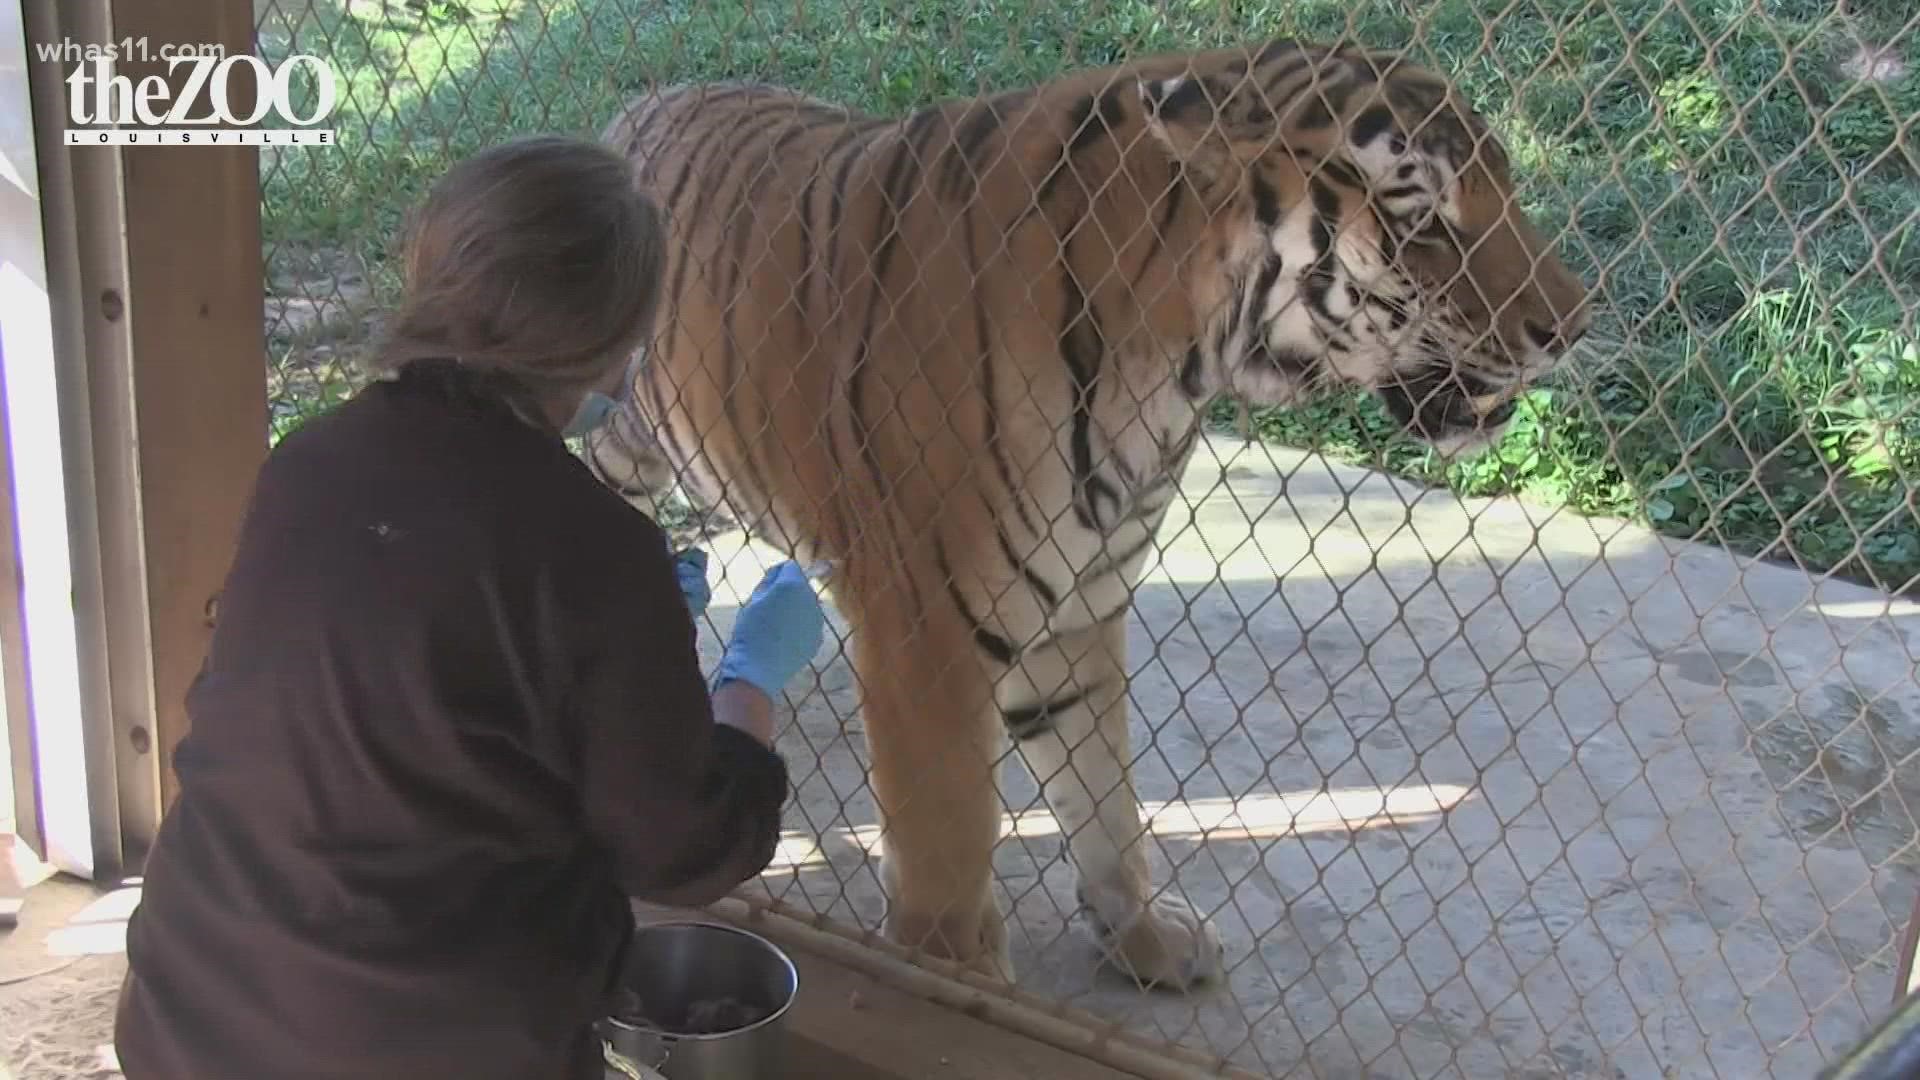 The donated Zoetis vaccine is a two-shot series, and the Louisville Zoo is one of 70 zoos to receive the vaccine.